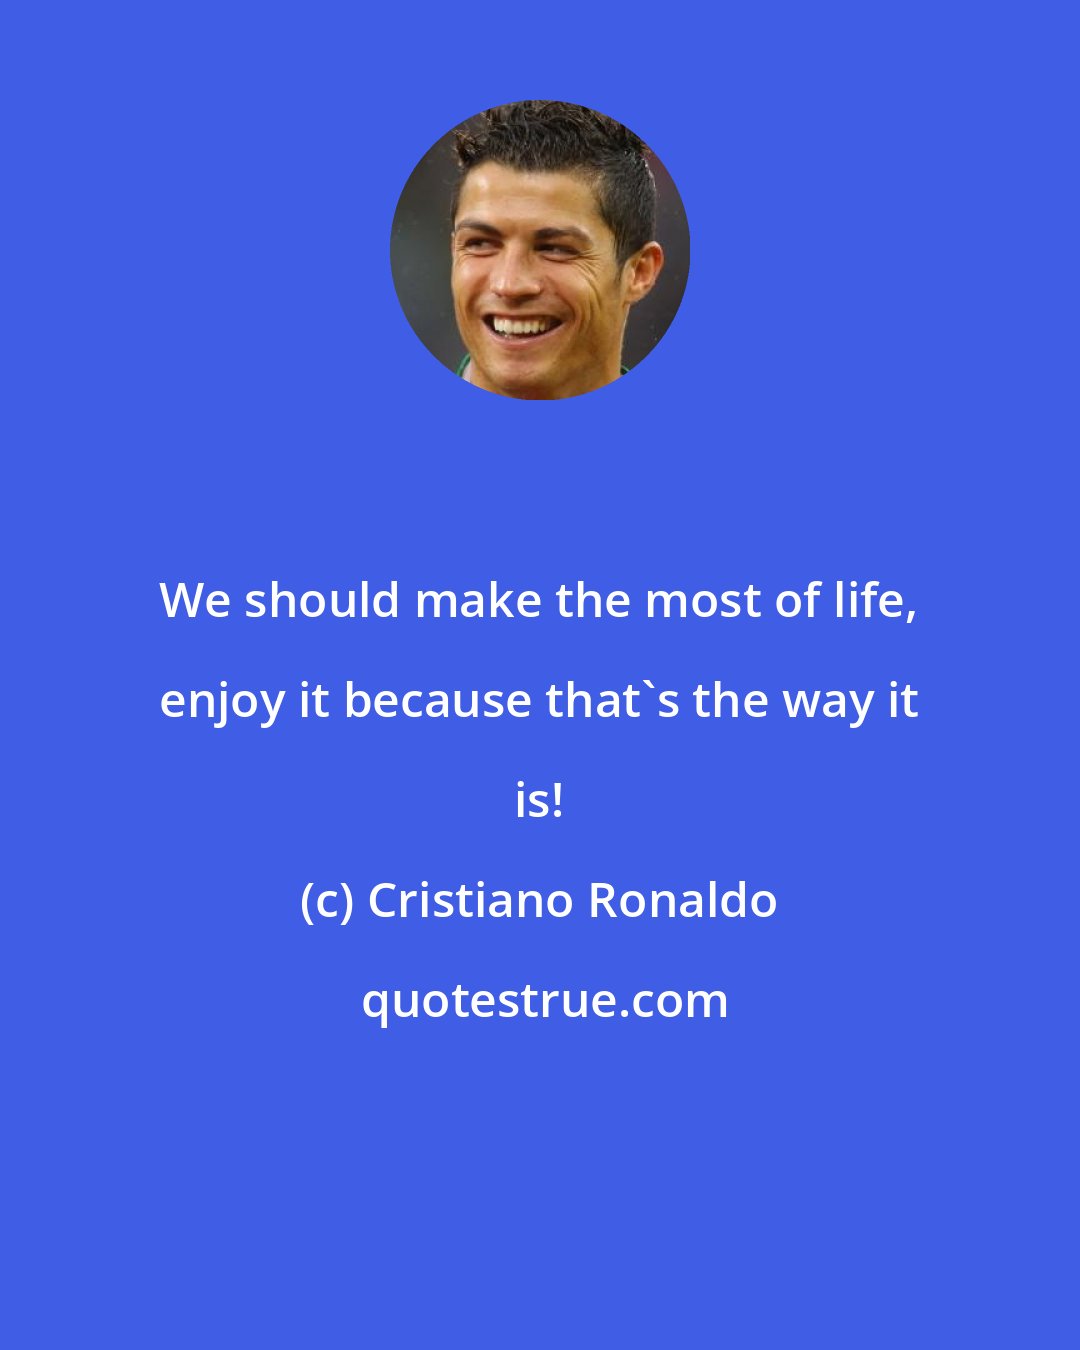 Cristiano Ronaldo: We should make the most of life, enjoy it because that's the way it is!